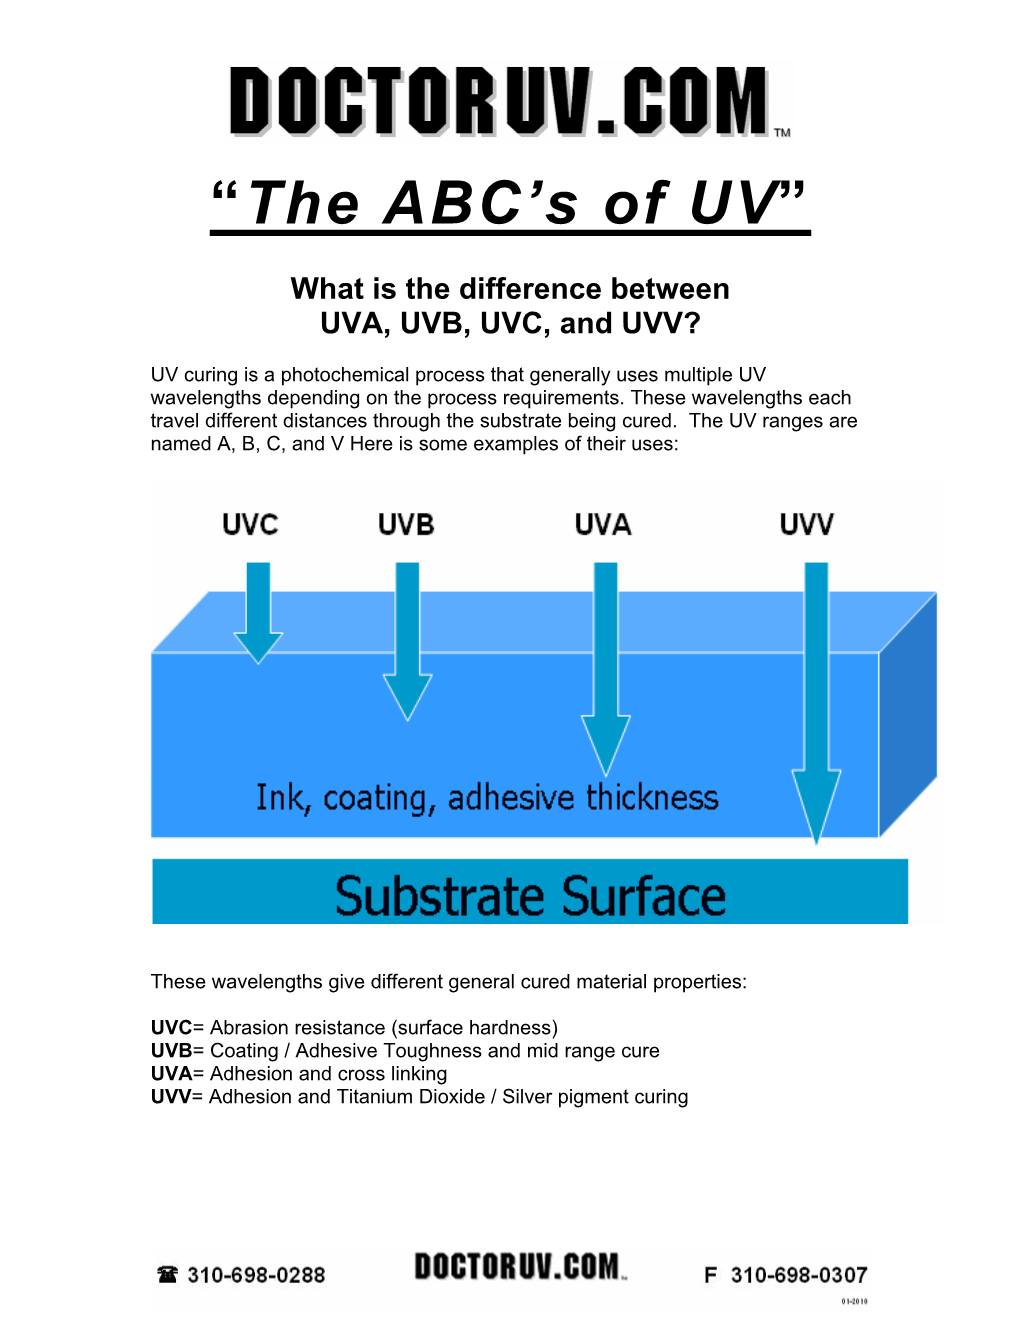 What Is the Difference Between UVA, UVB, UVC, and UVV?